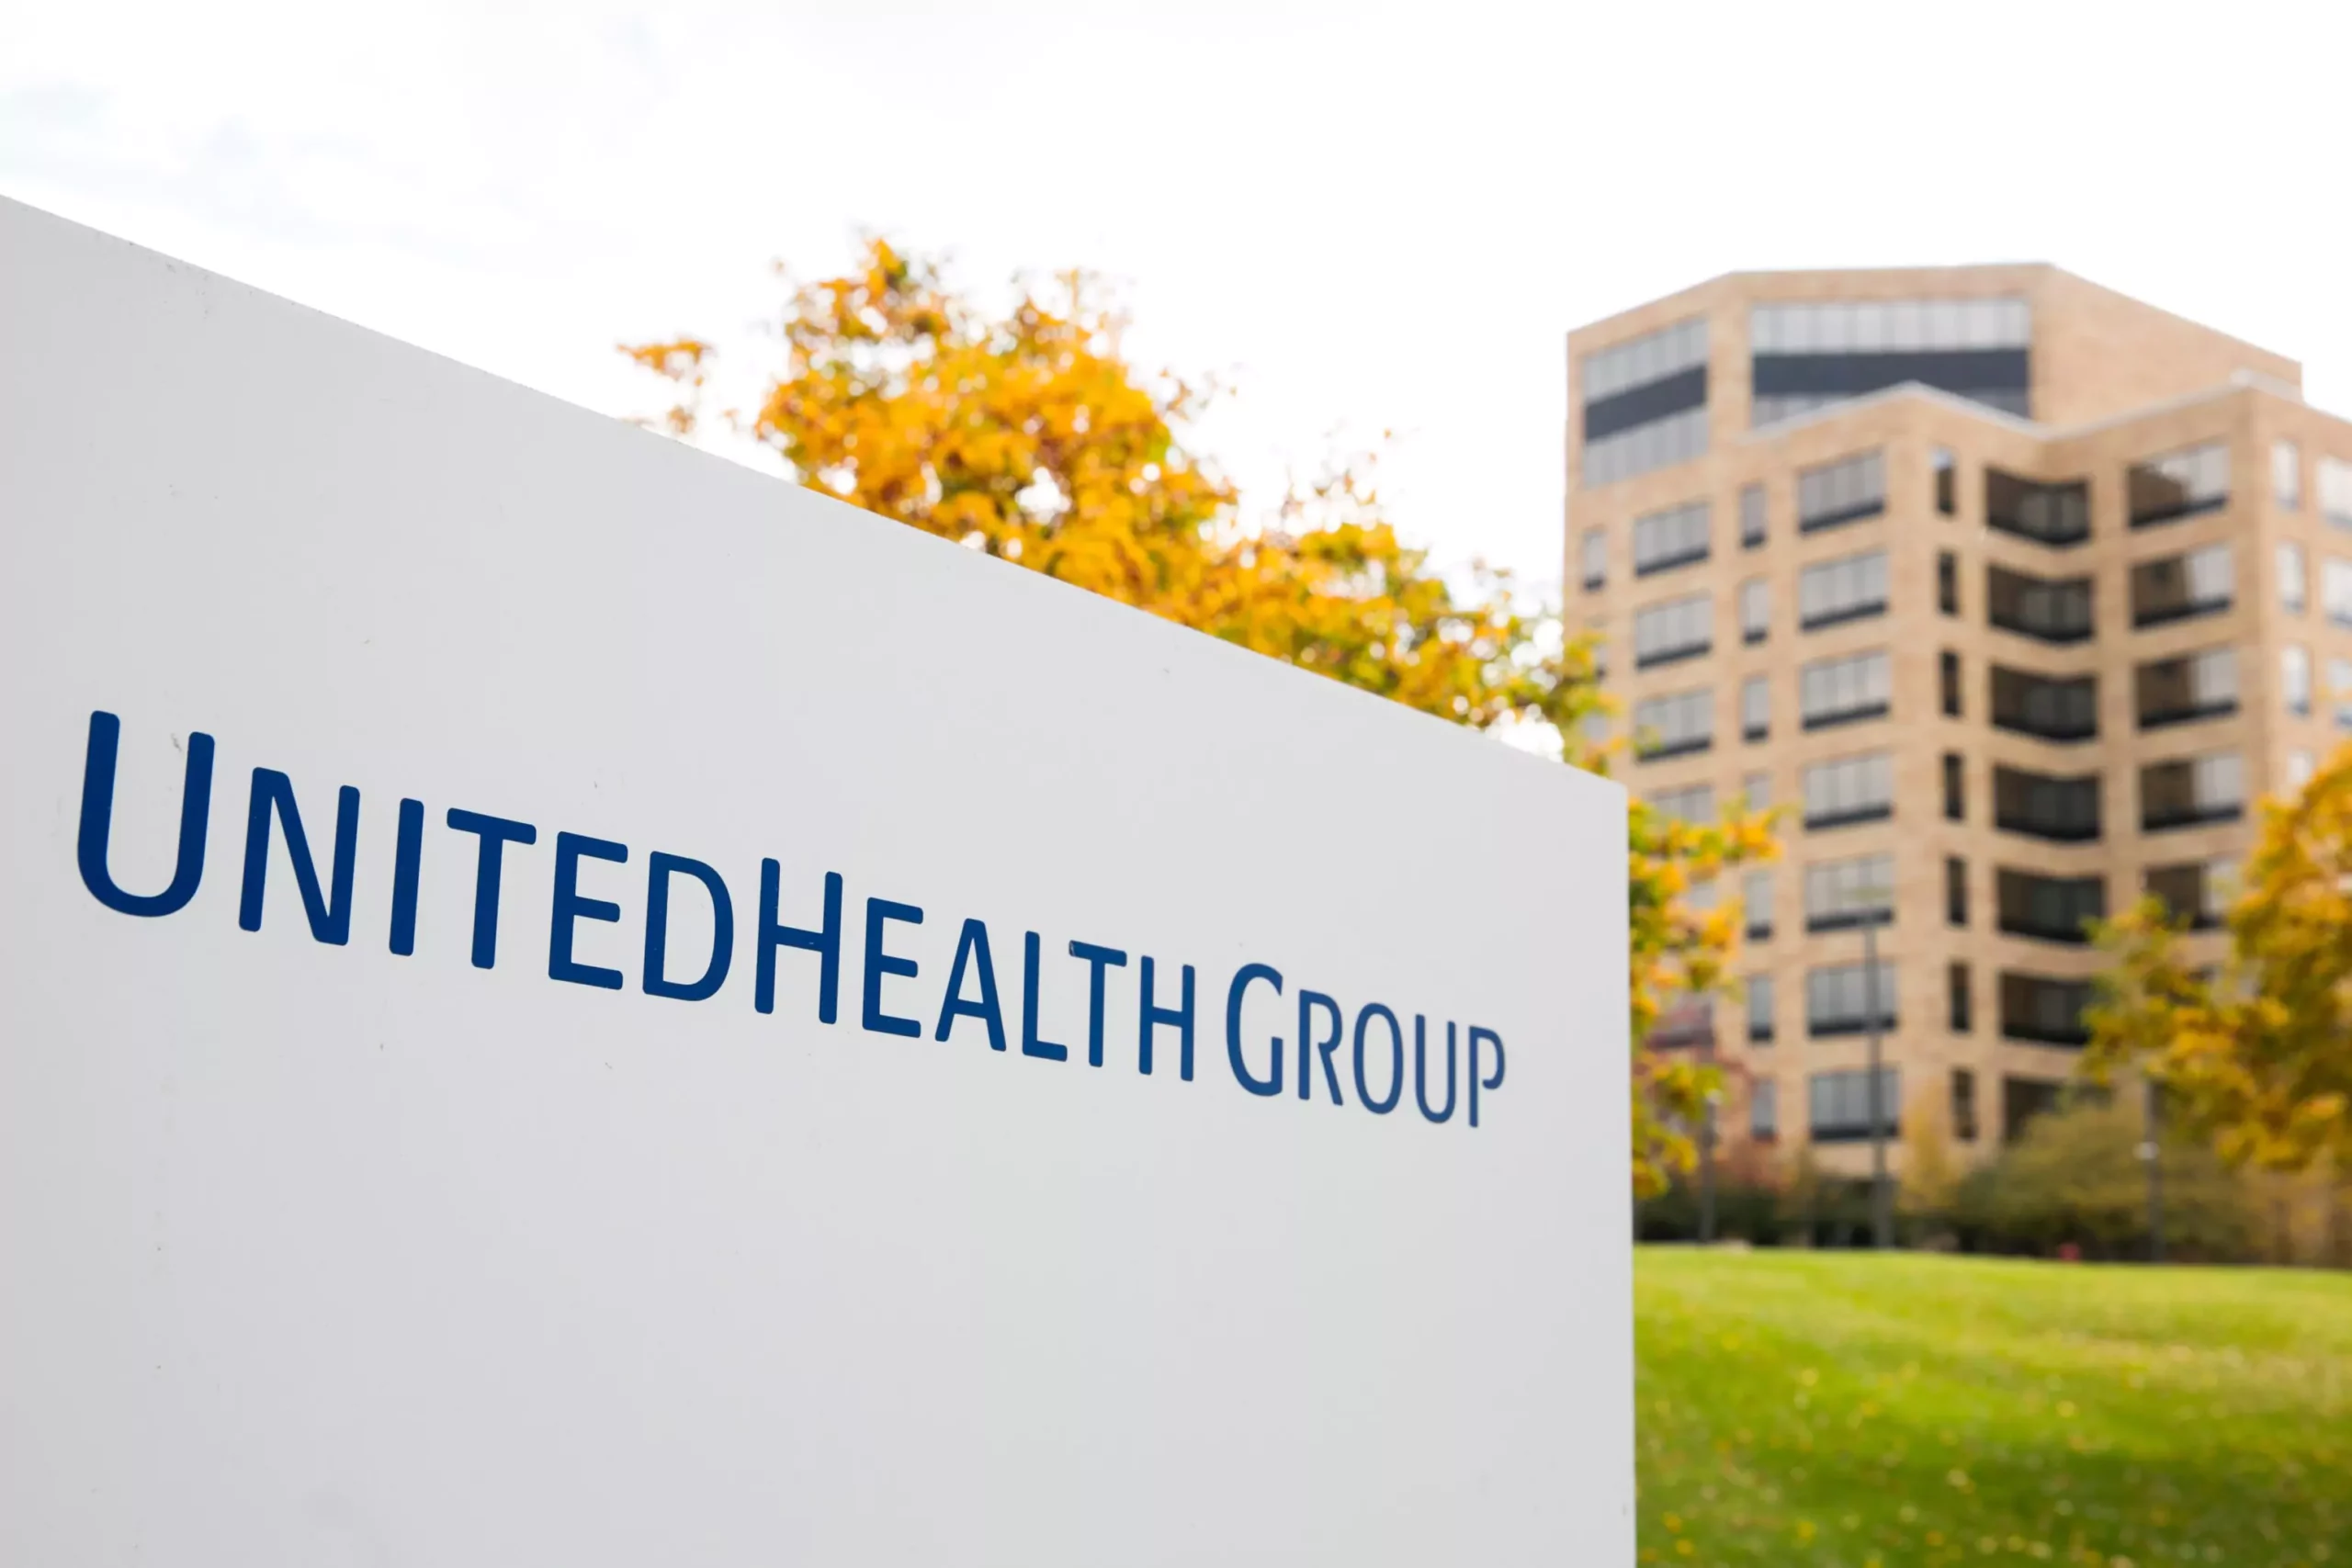 UnitedHealth Group: A Beacon of Hope in a Complex Healthcare Landscape